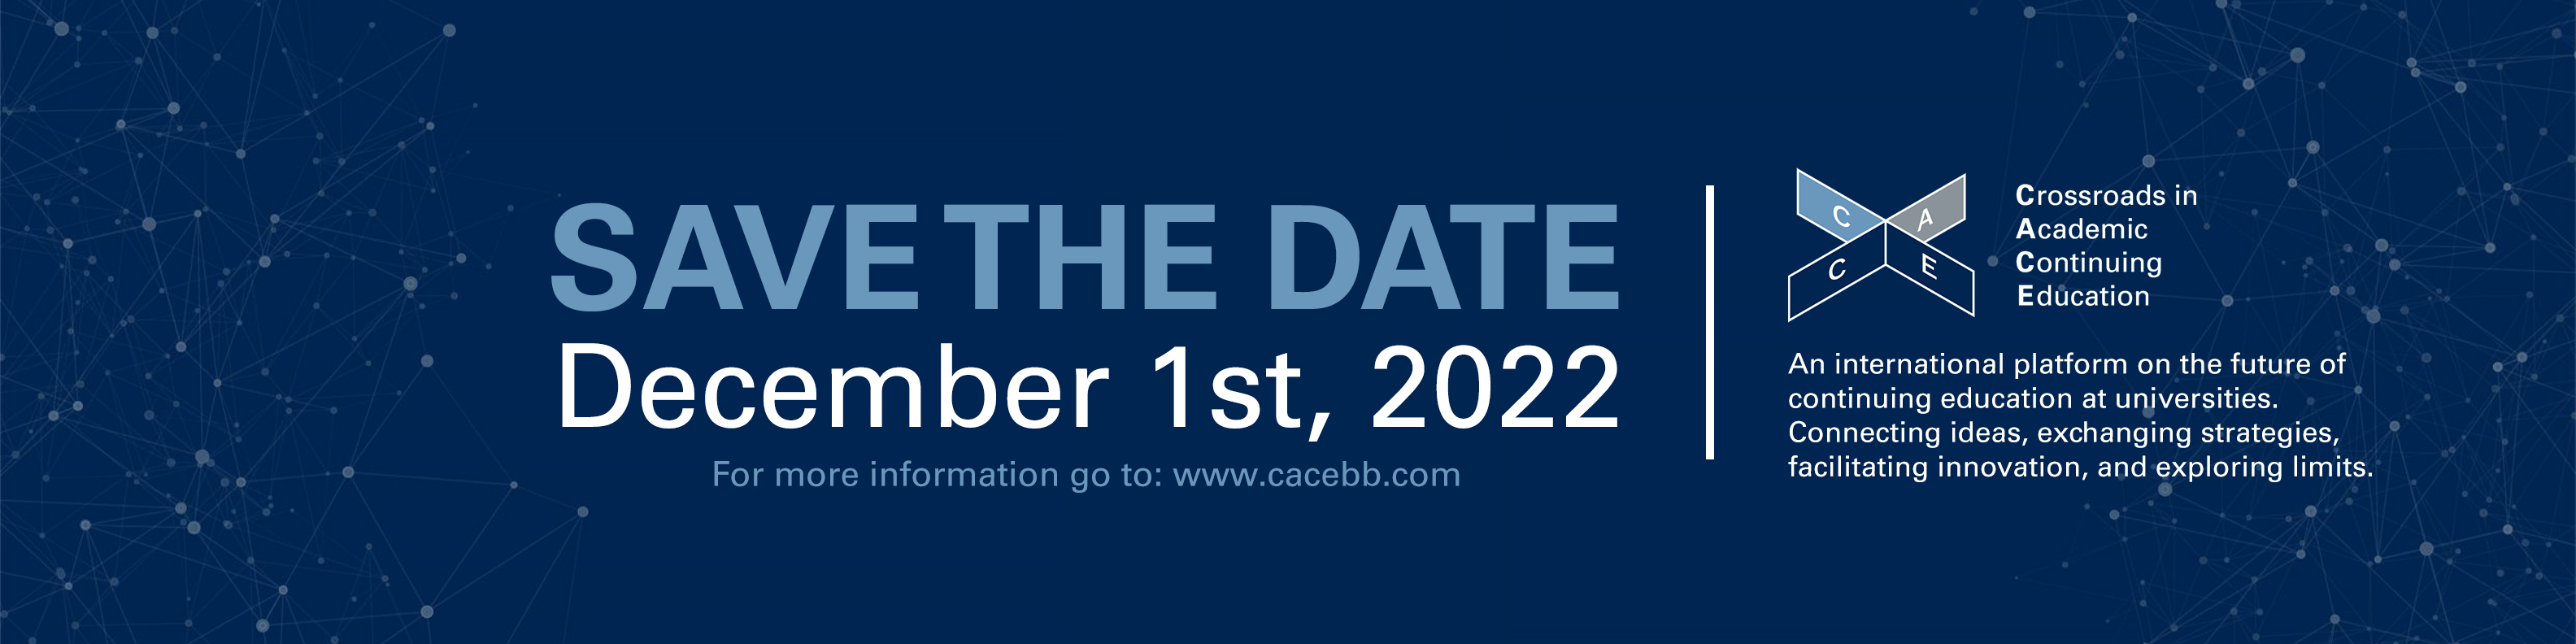 Save the Date 2022